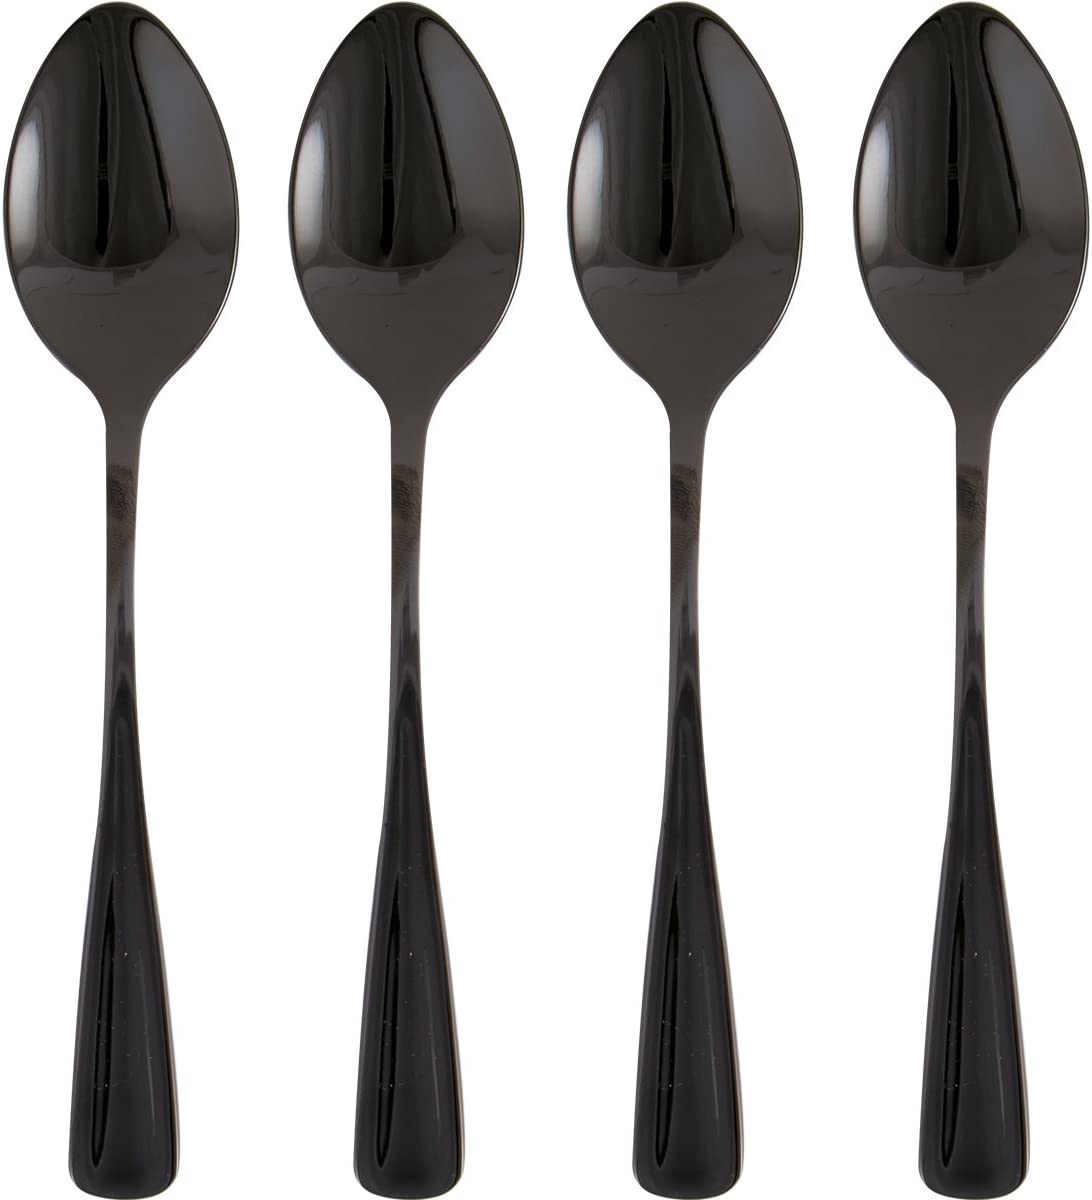 Creative Tops La Cafetiere Shiny Stainless Steel Tea Spoons, Set of 4, Black